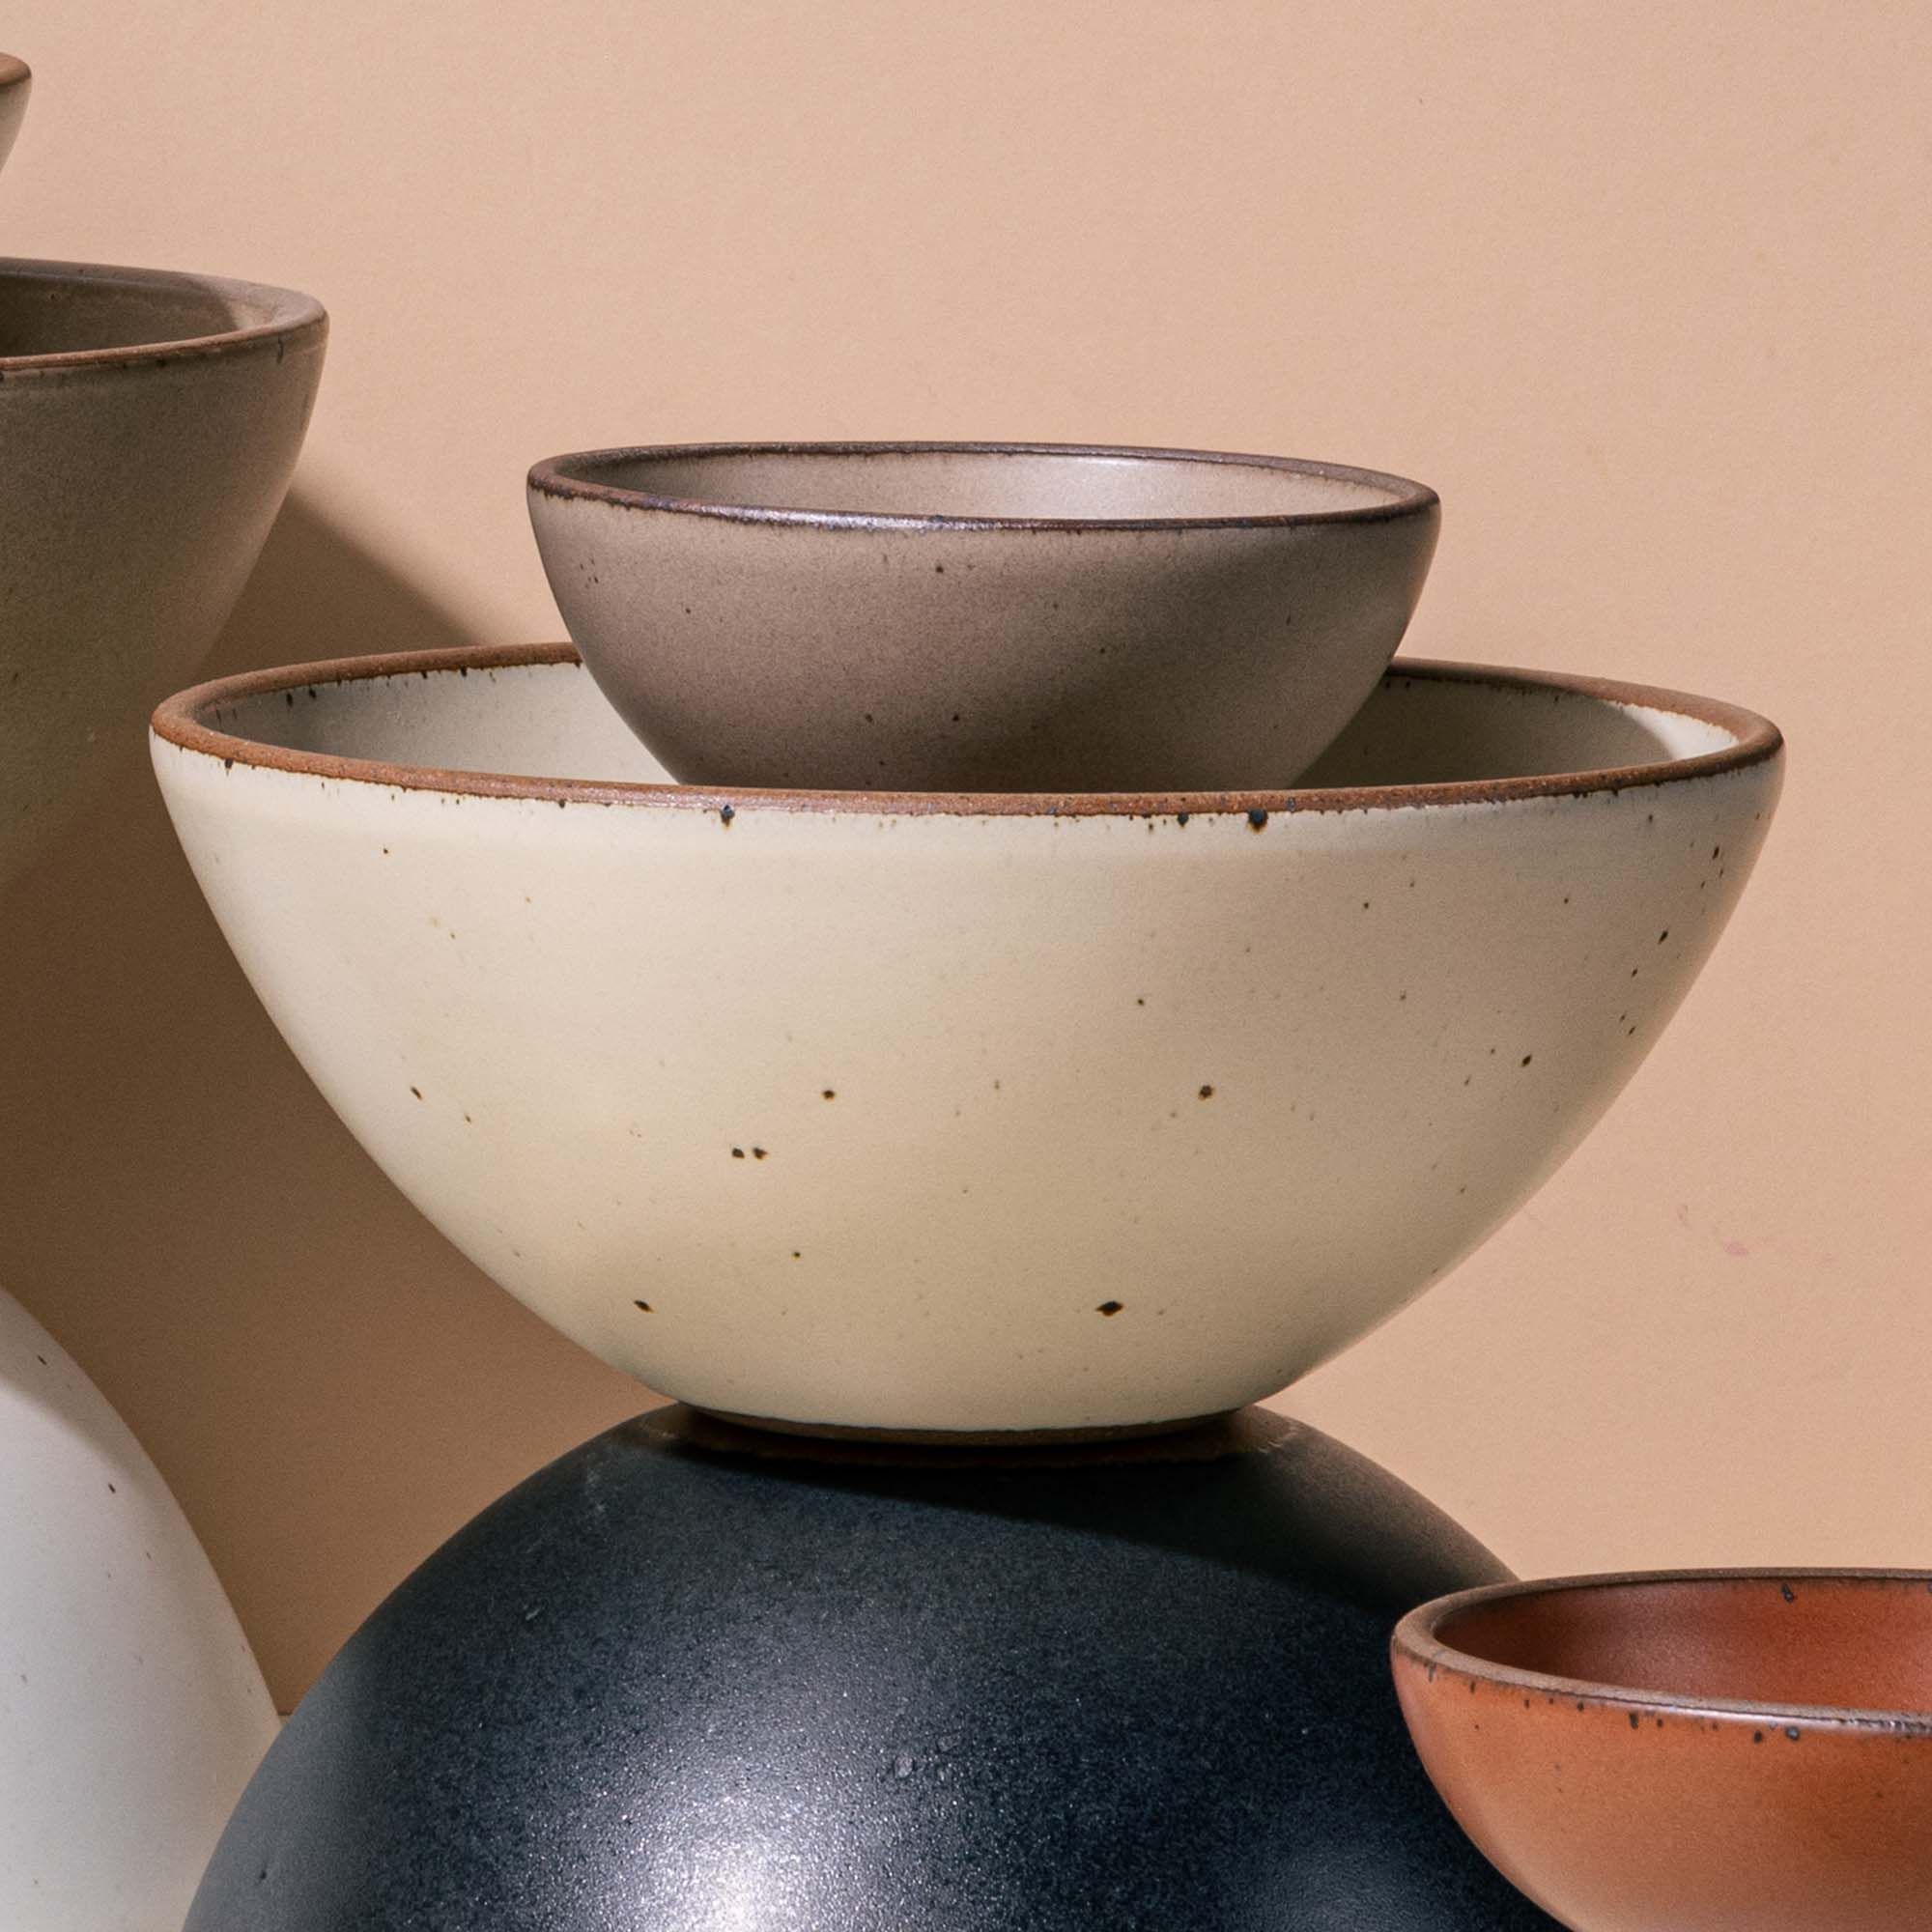 An artful arrangement of ceramic bowls with a focus on a popcorn bowl in an off-white color with iron speckles